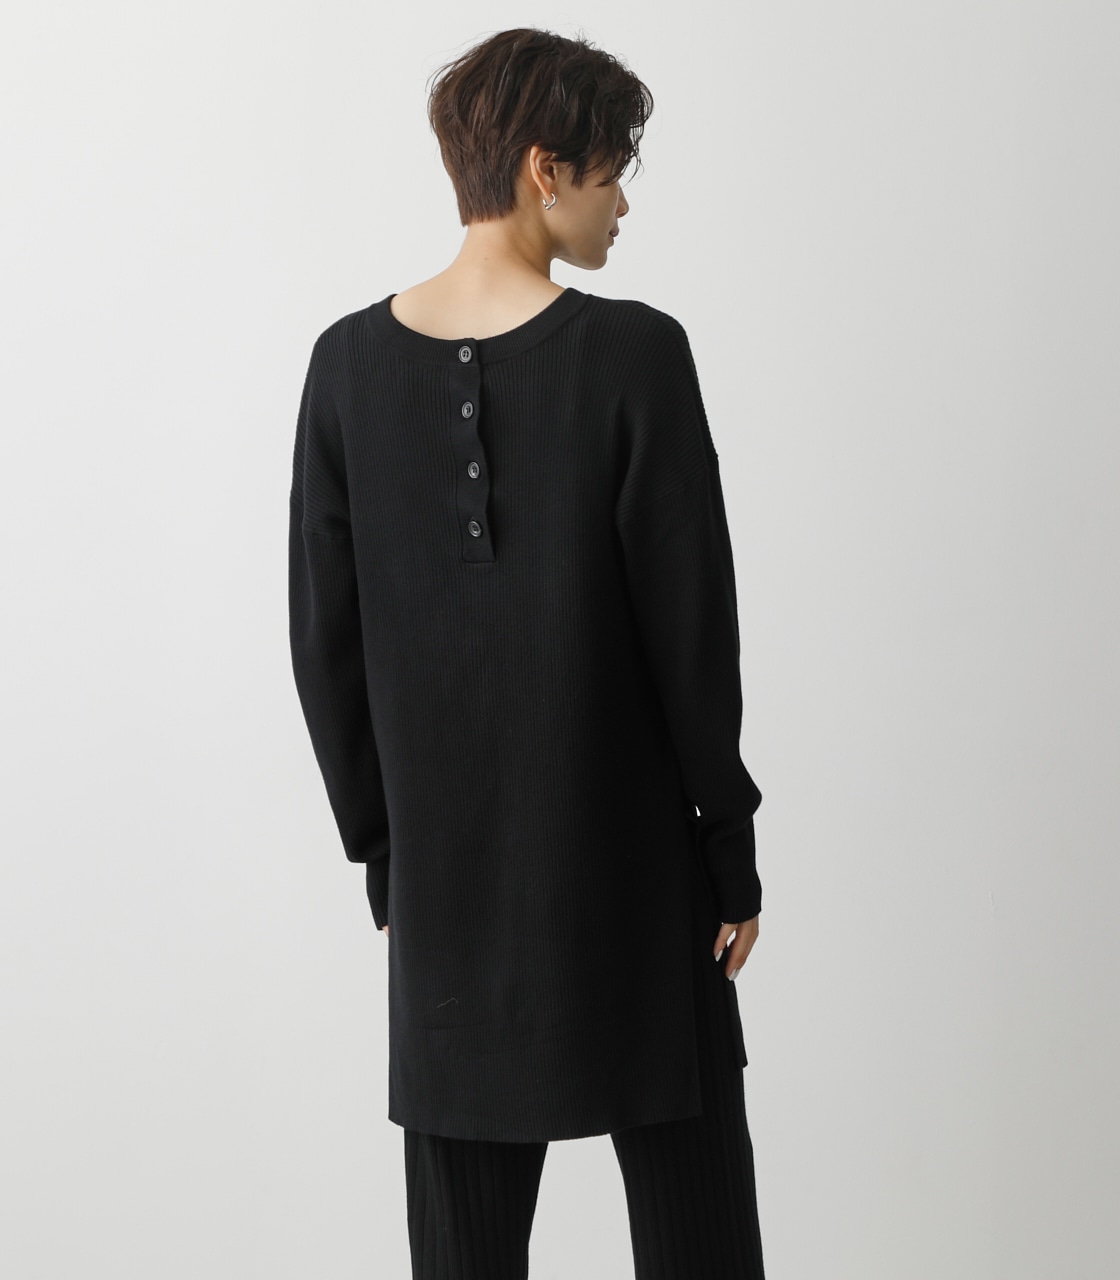 2WAY RIB KNIT LONG TOPS/2WAYリブニットロングトップス 詳細画像 BLK 7